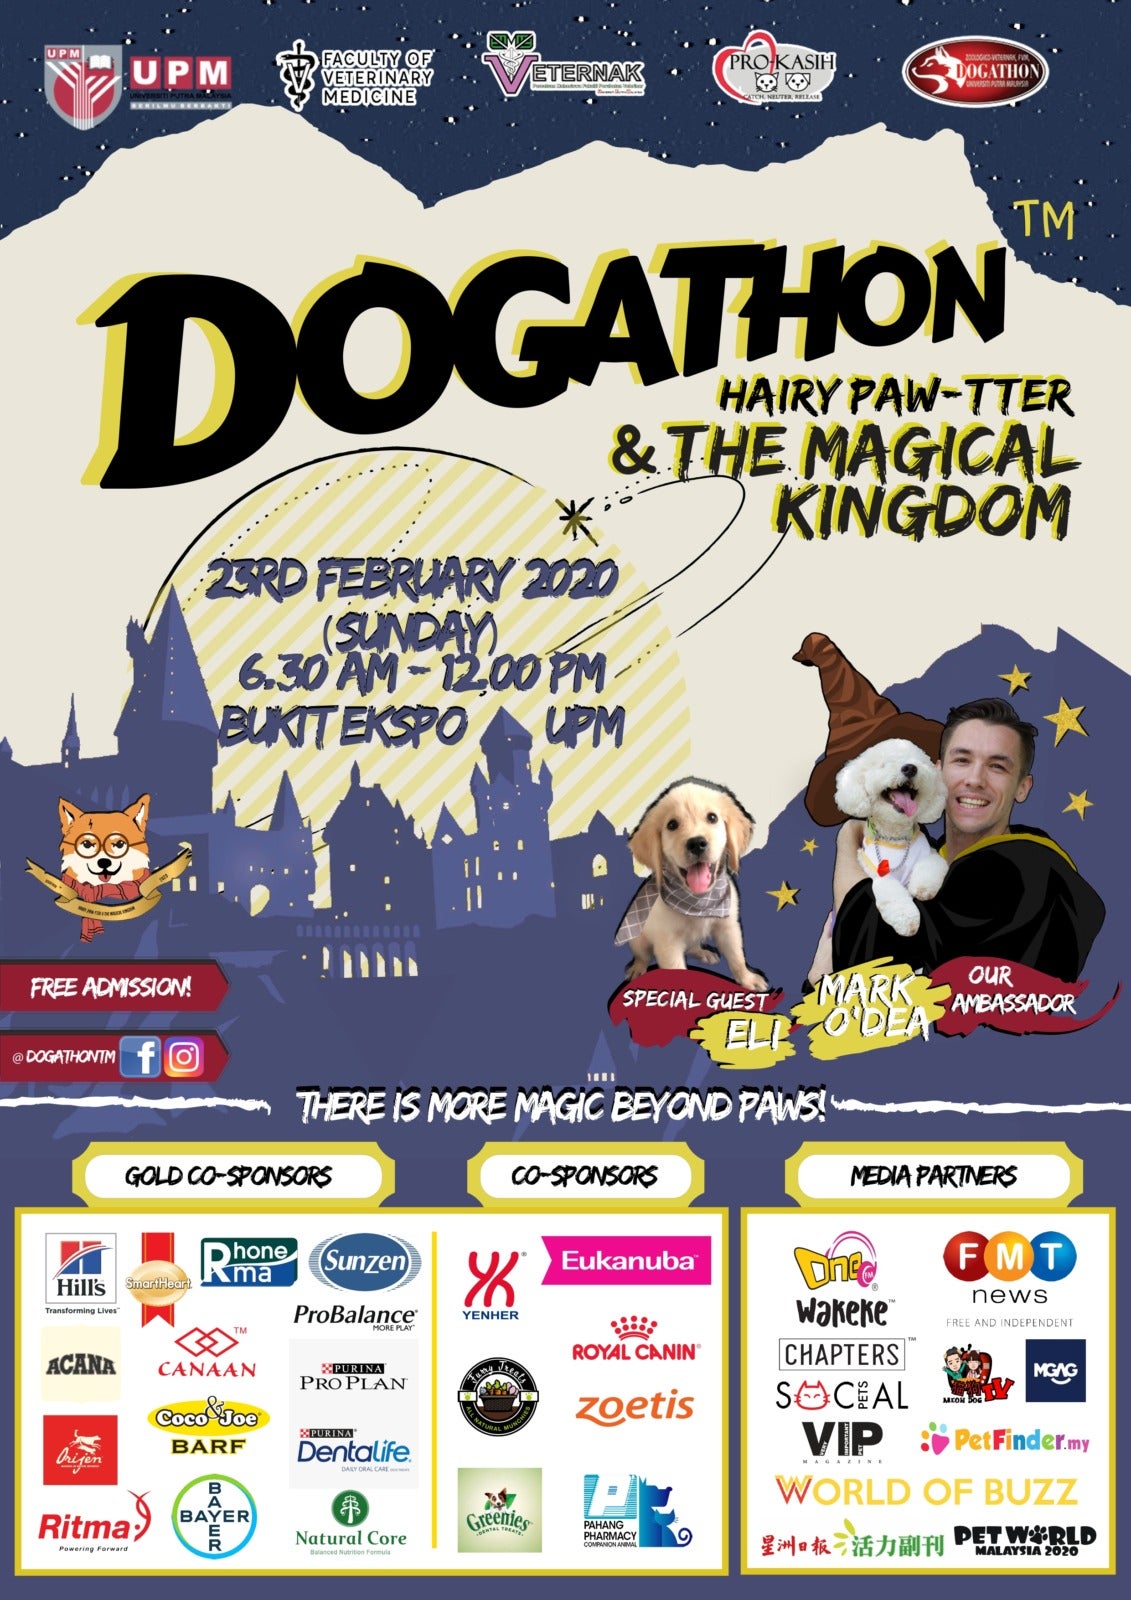 [TEST] This Event in M'sia Has Over 700 Cute Doggos & Is Held In Conjunction with An Amazing Cause! - WORLD OF BUZZ 16